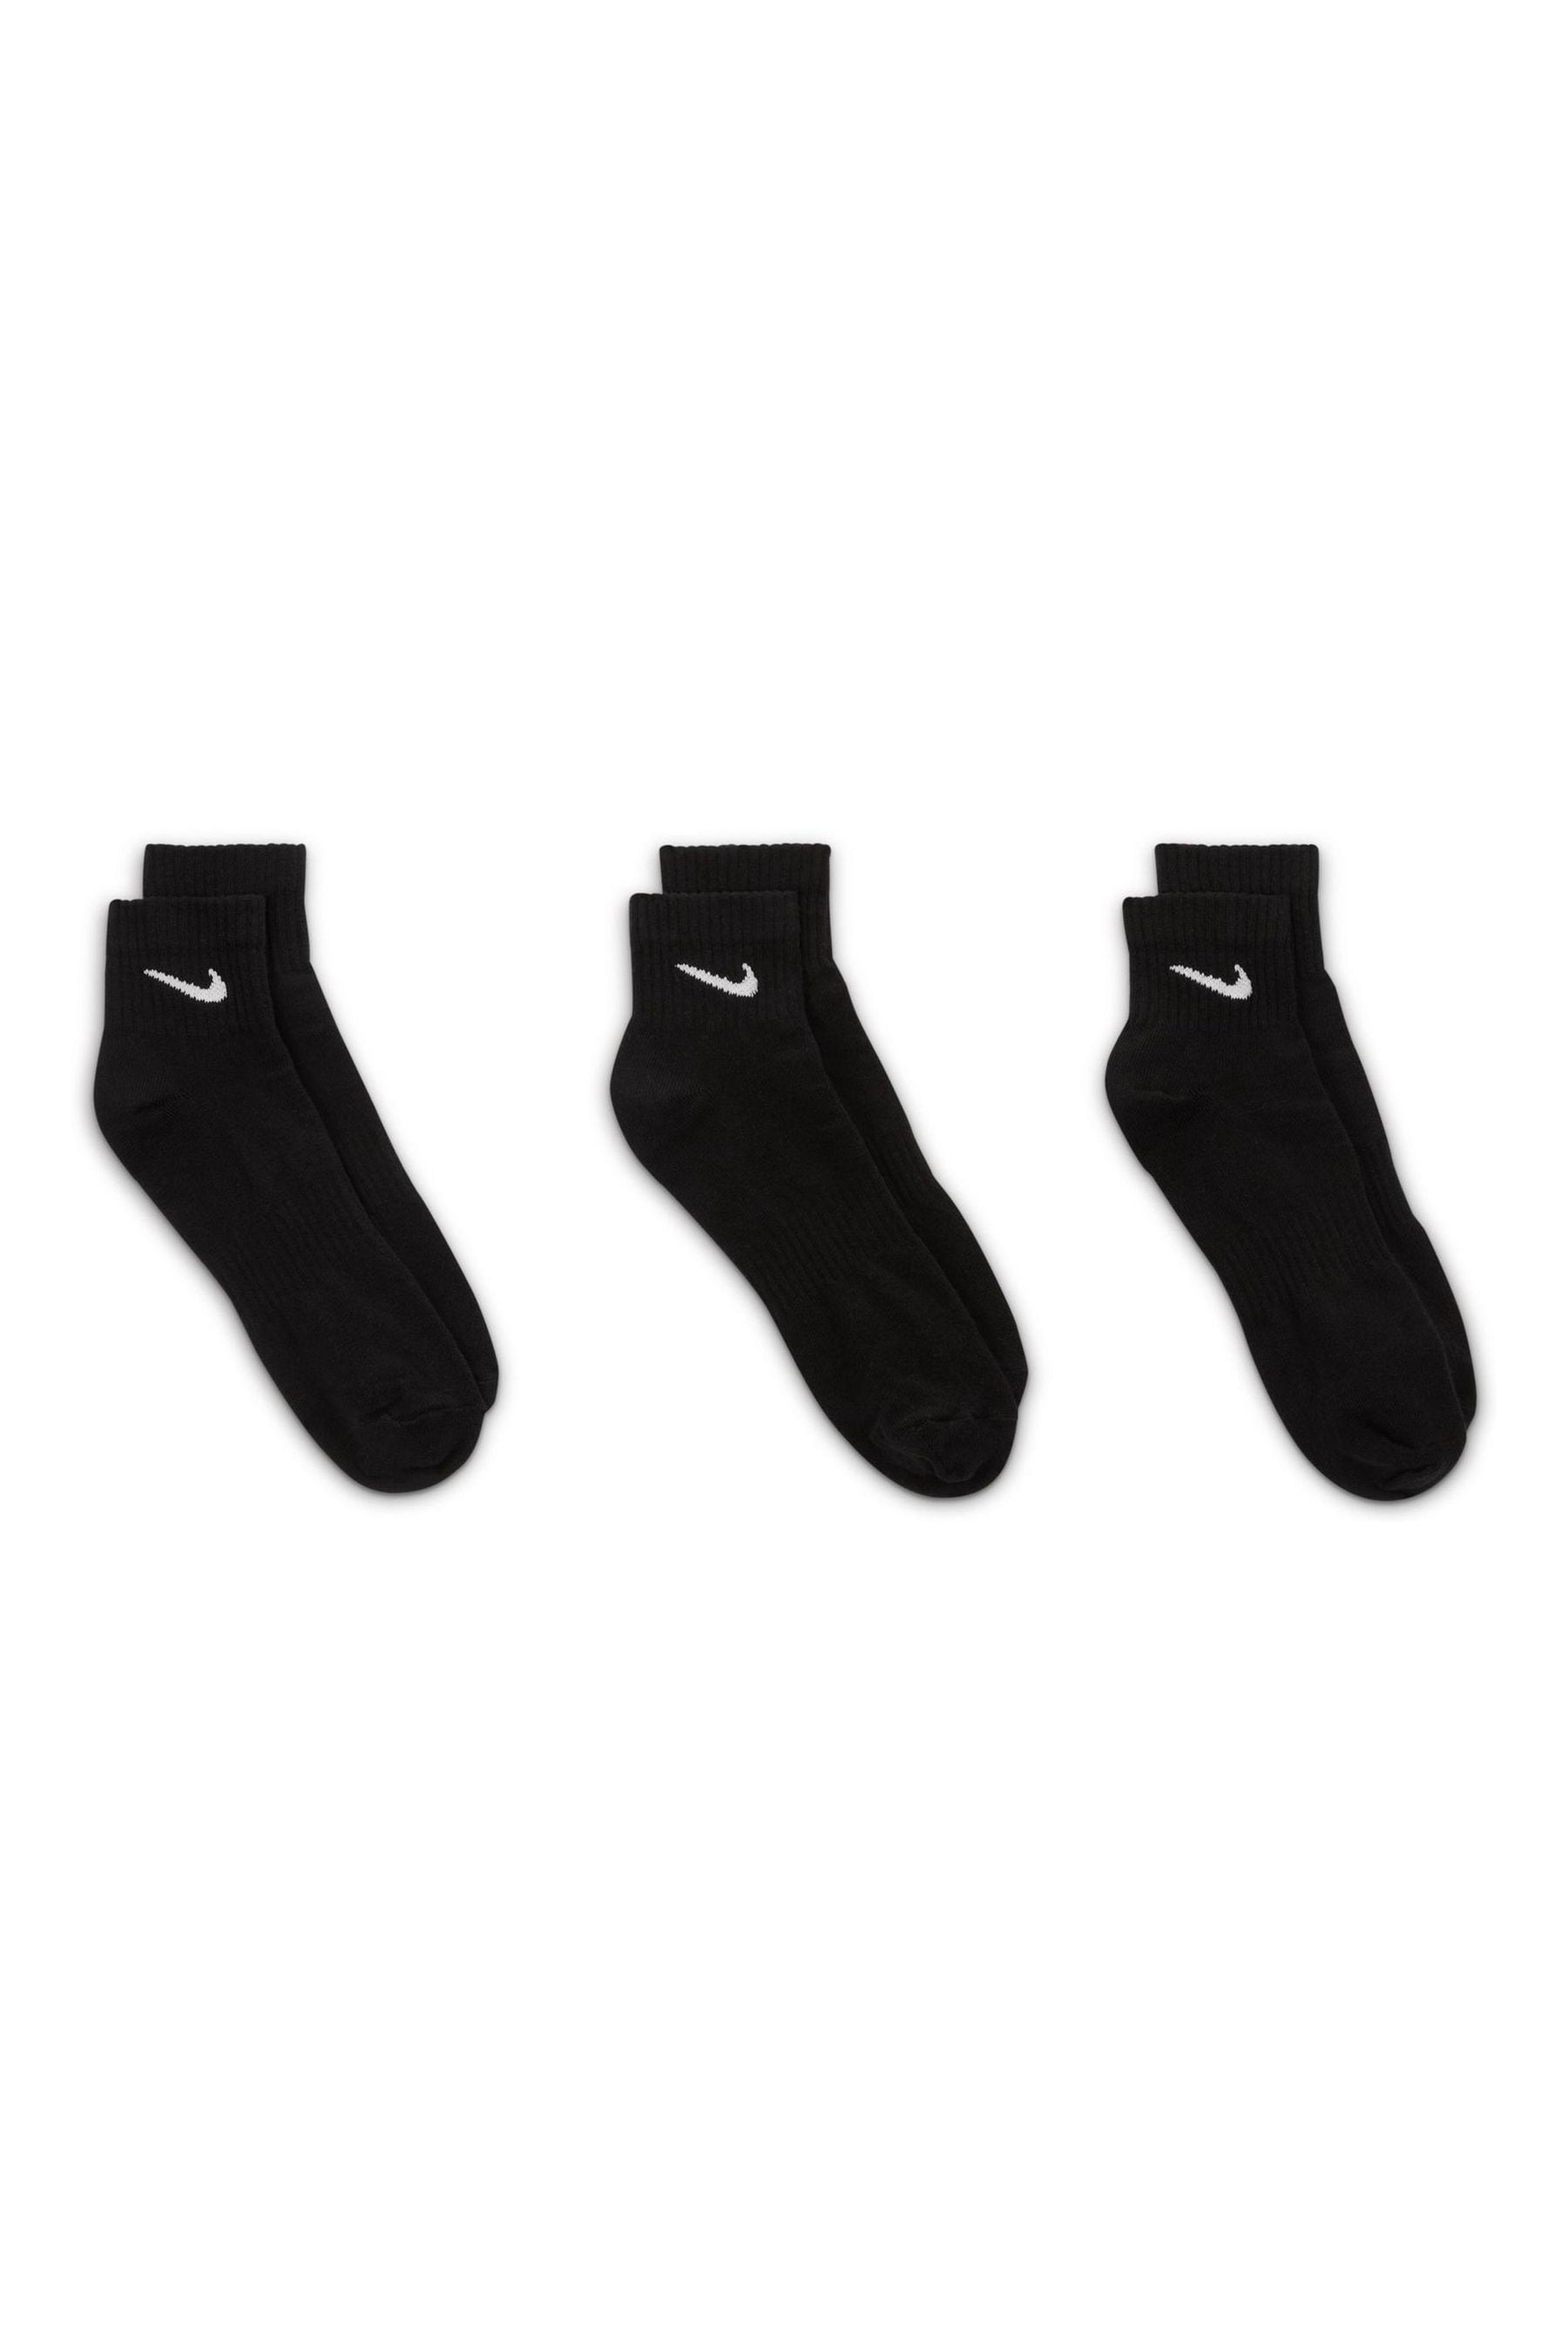 Buy Nike Black Lightweight Everyday Ankle Socks 3 Pack from the Next UK ...